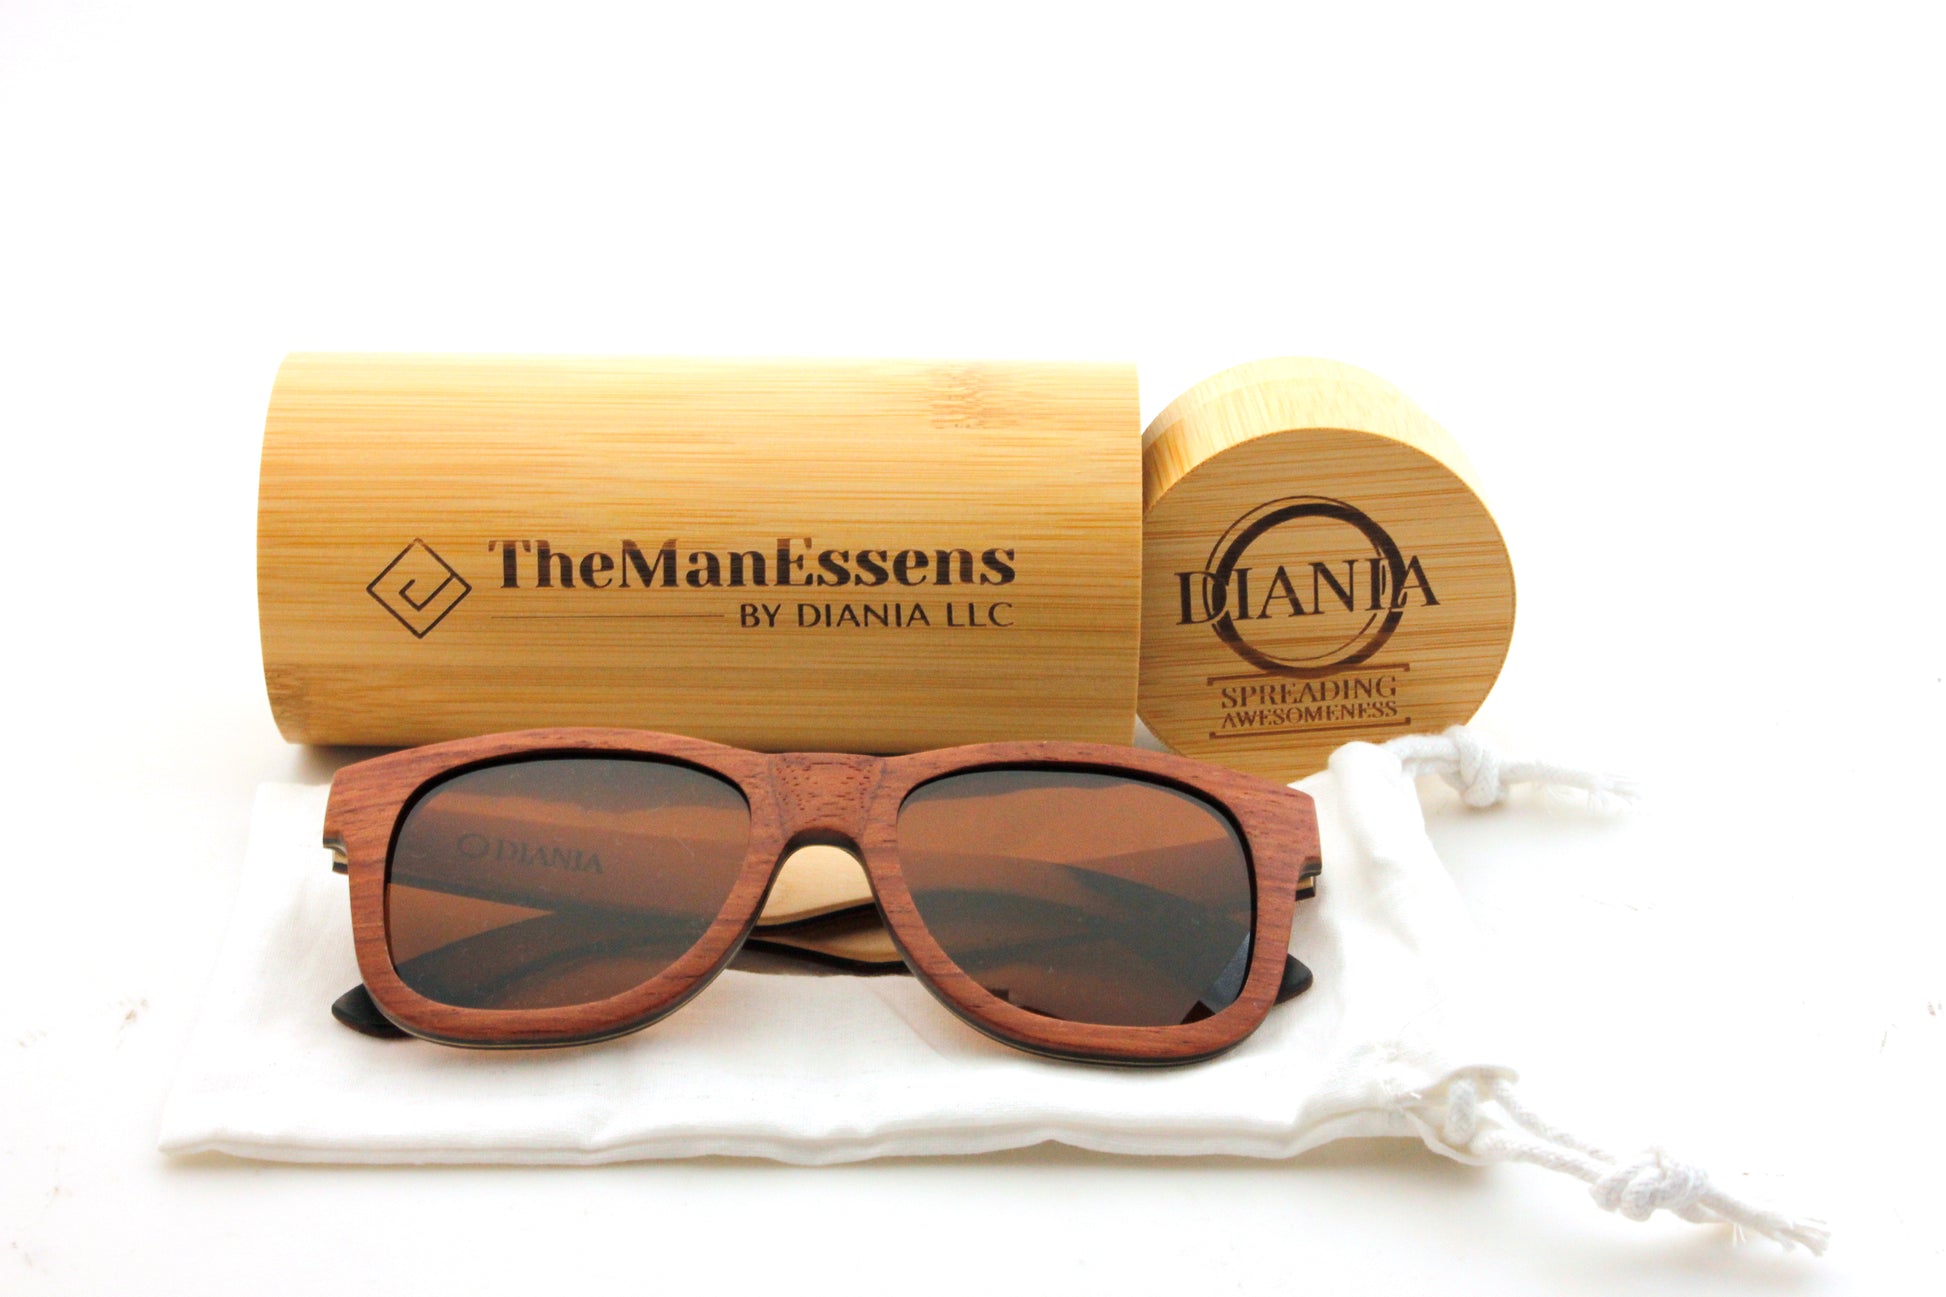 Els Plans bubinga Skateboard Wood Sunglasses on cotton bag in front of bamboo cilinder case